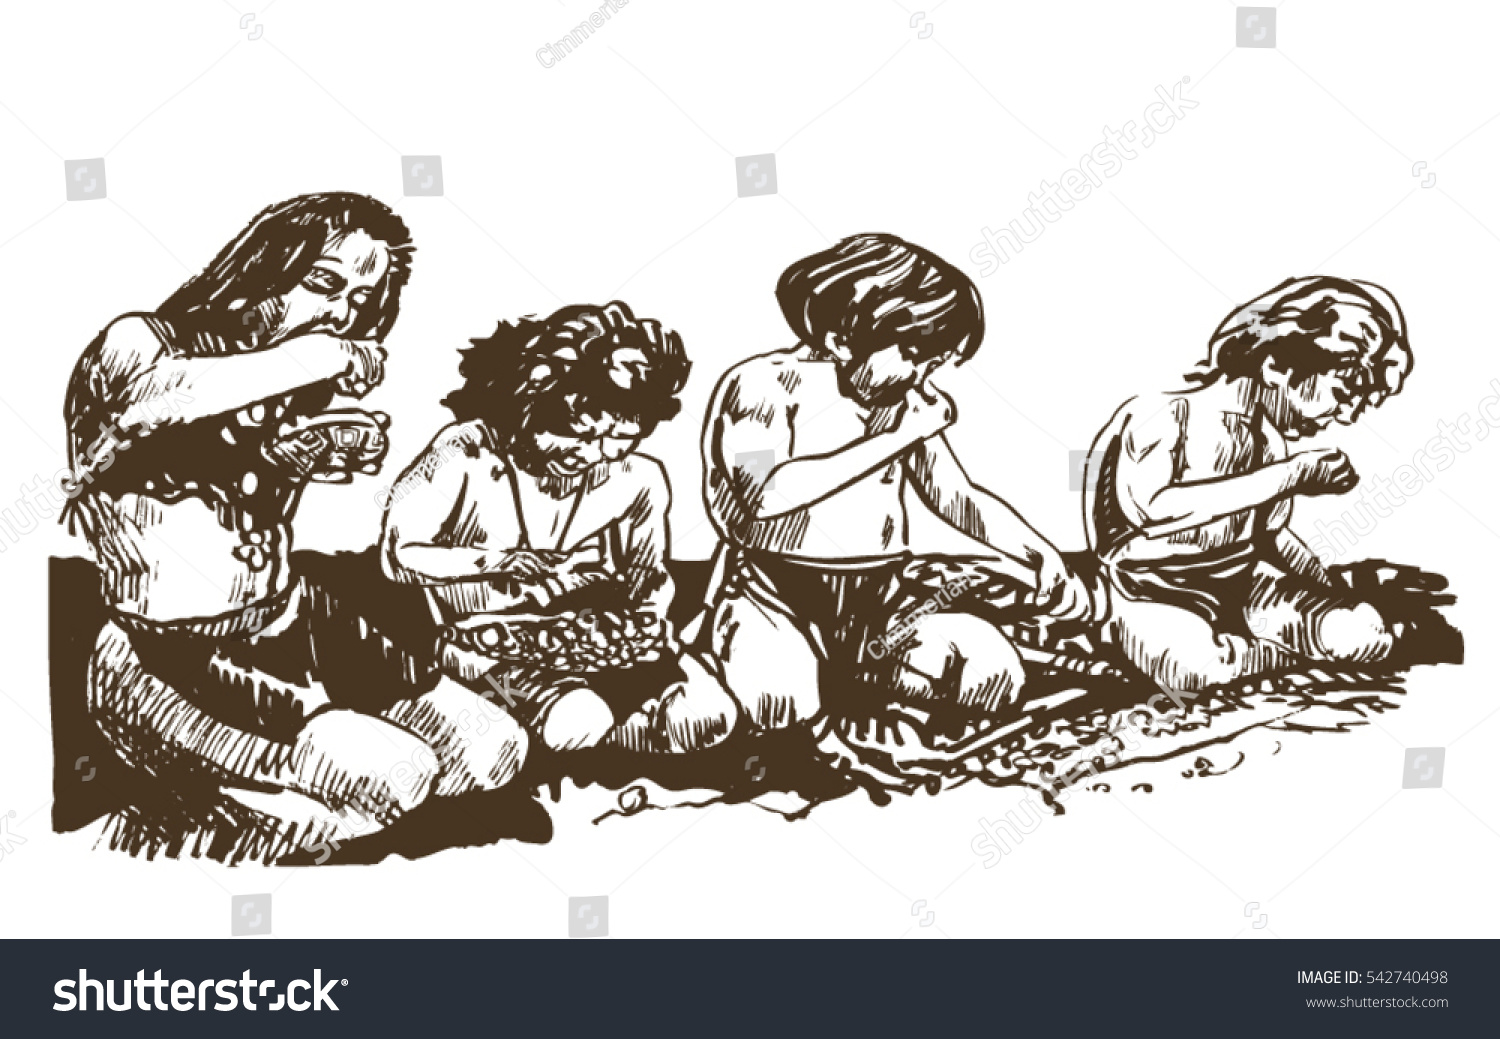 SVG of Children of ancient people, the Cro-Magnons (Homo sapiens). Hand drawn illustration. svg